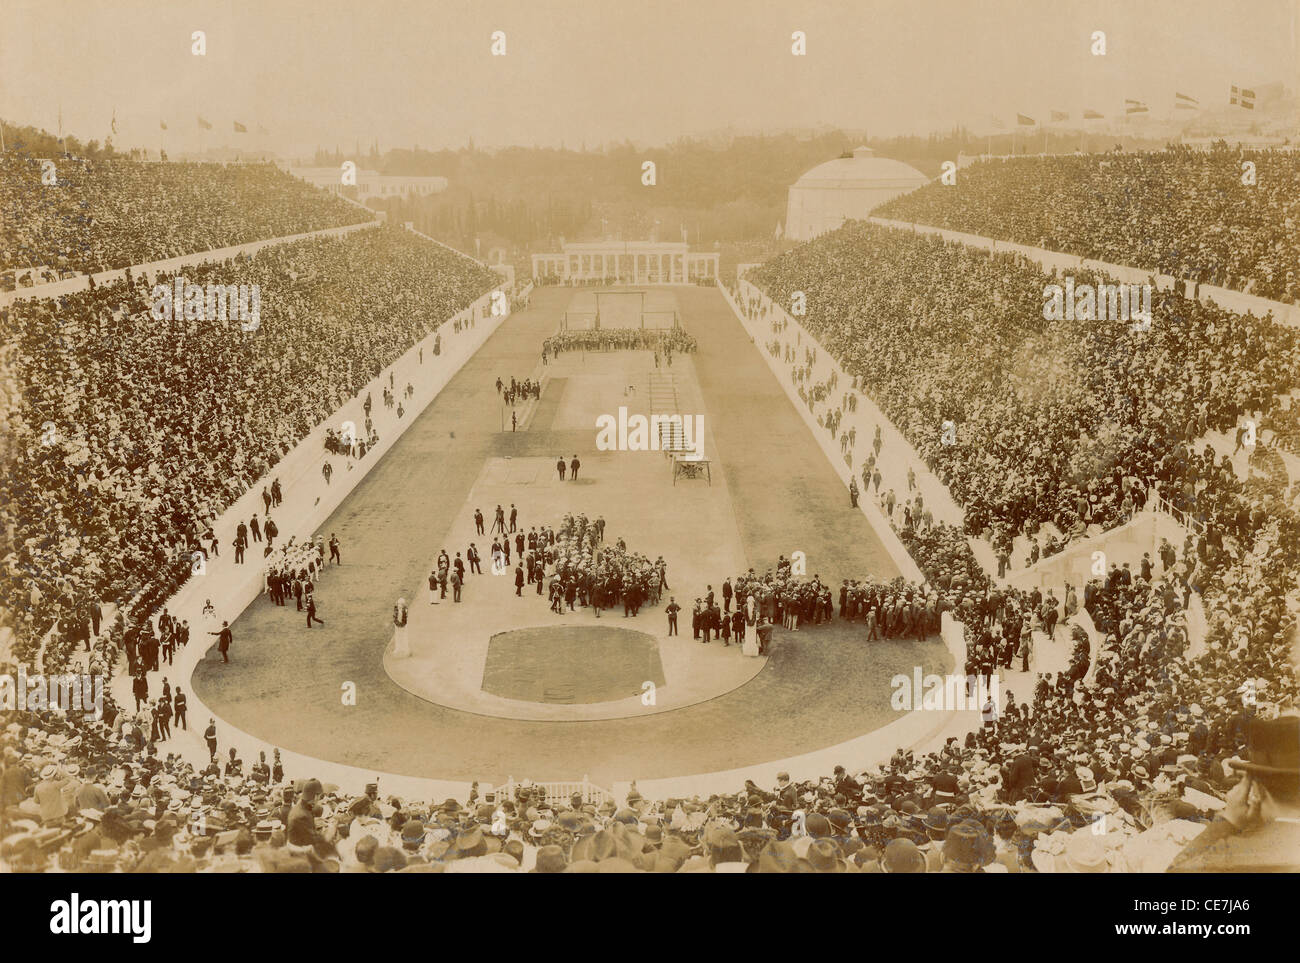 Greece, Attica, Athens, Opening ceremony of the 1896 Games of the I Olympiad in the Panathinaiko stadium. Stock Photo